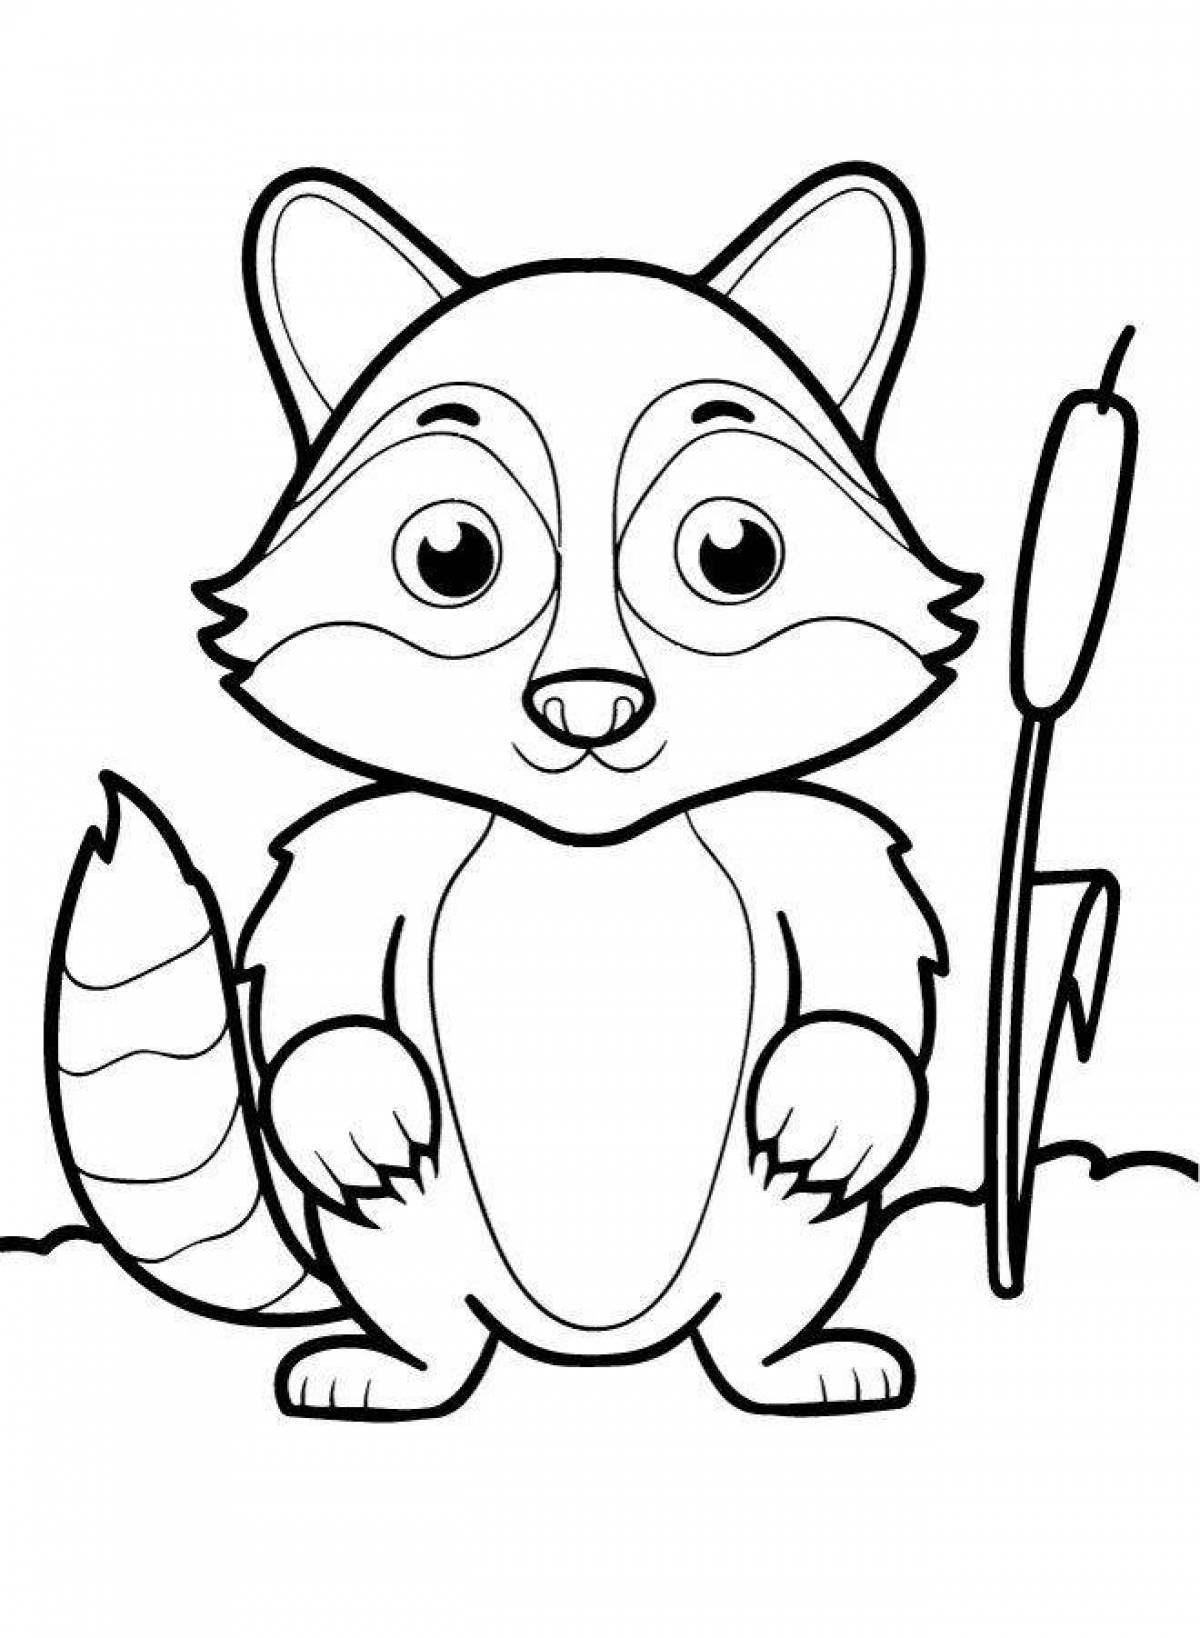 Coloring pages animals